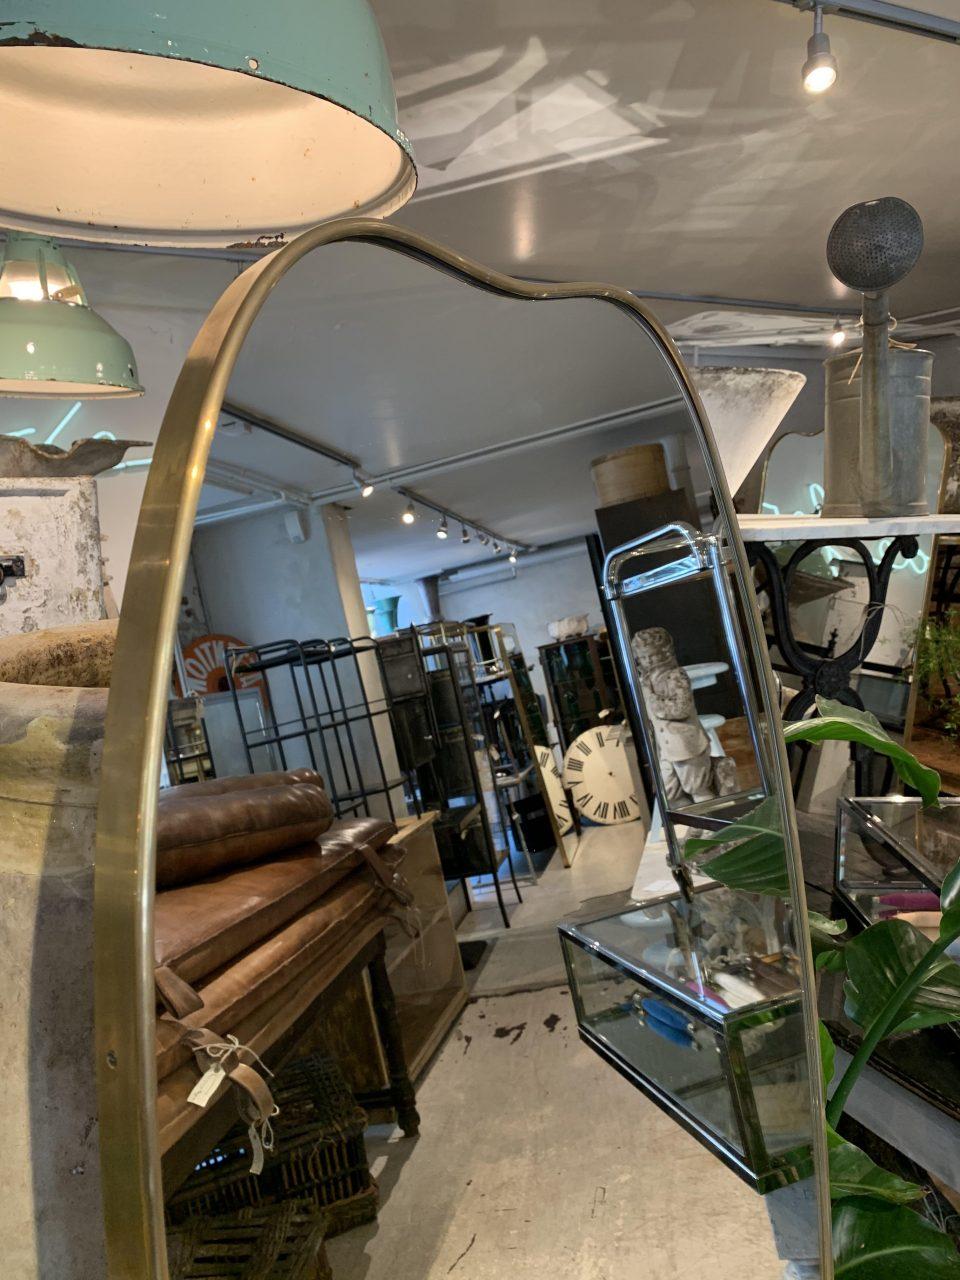 Sophisticated and sleek Italian brass mirror from the 1960s, with a beautiful curved design and a simple brass profile. The mirrored glass is original and it is stylistically related to the well-known designer Giò Ponti.

Particularly eye catching